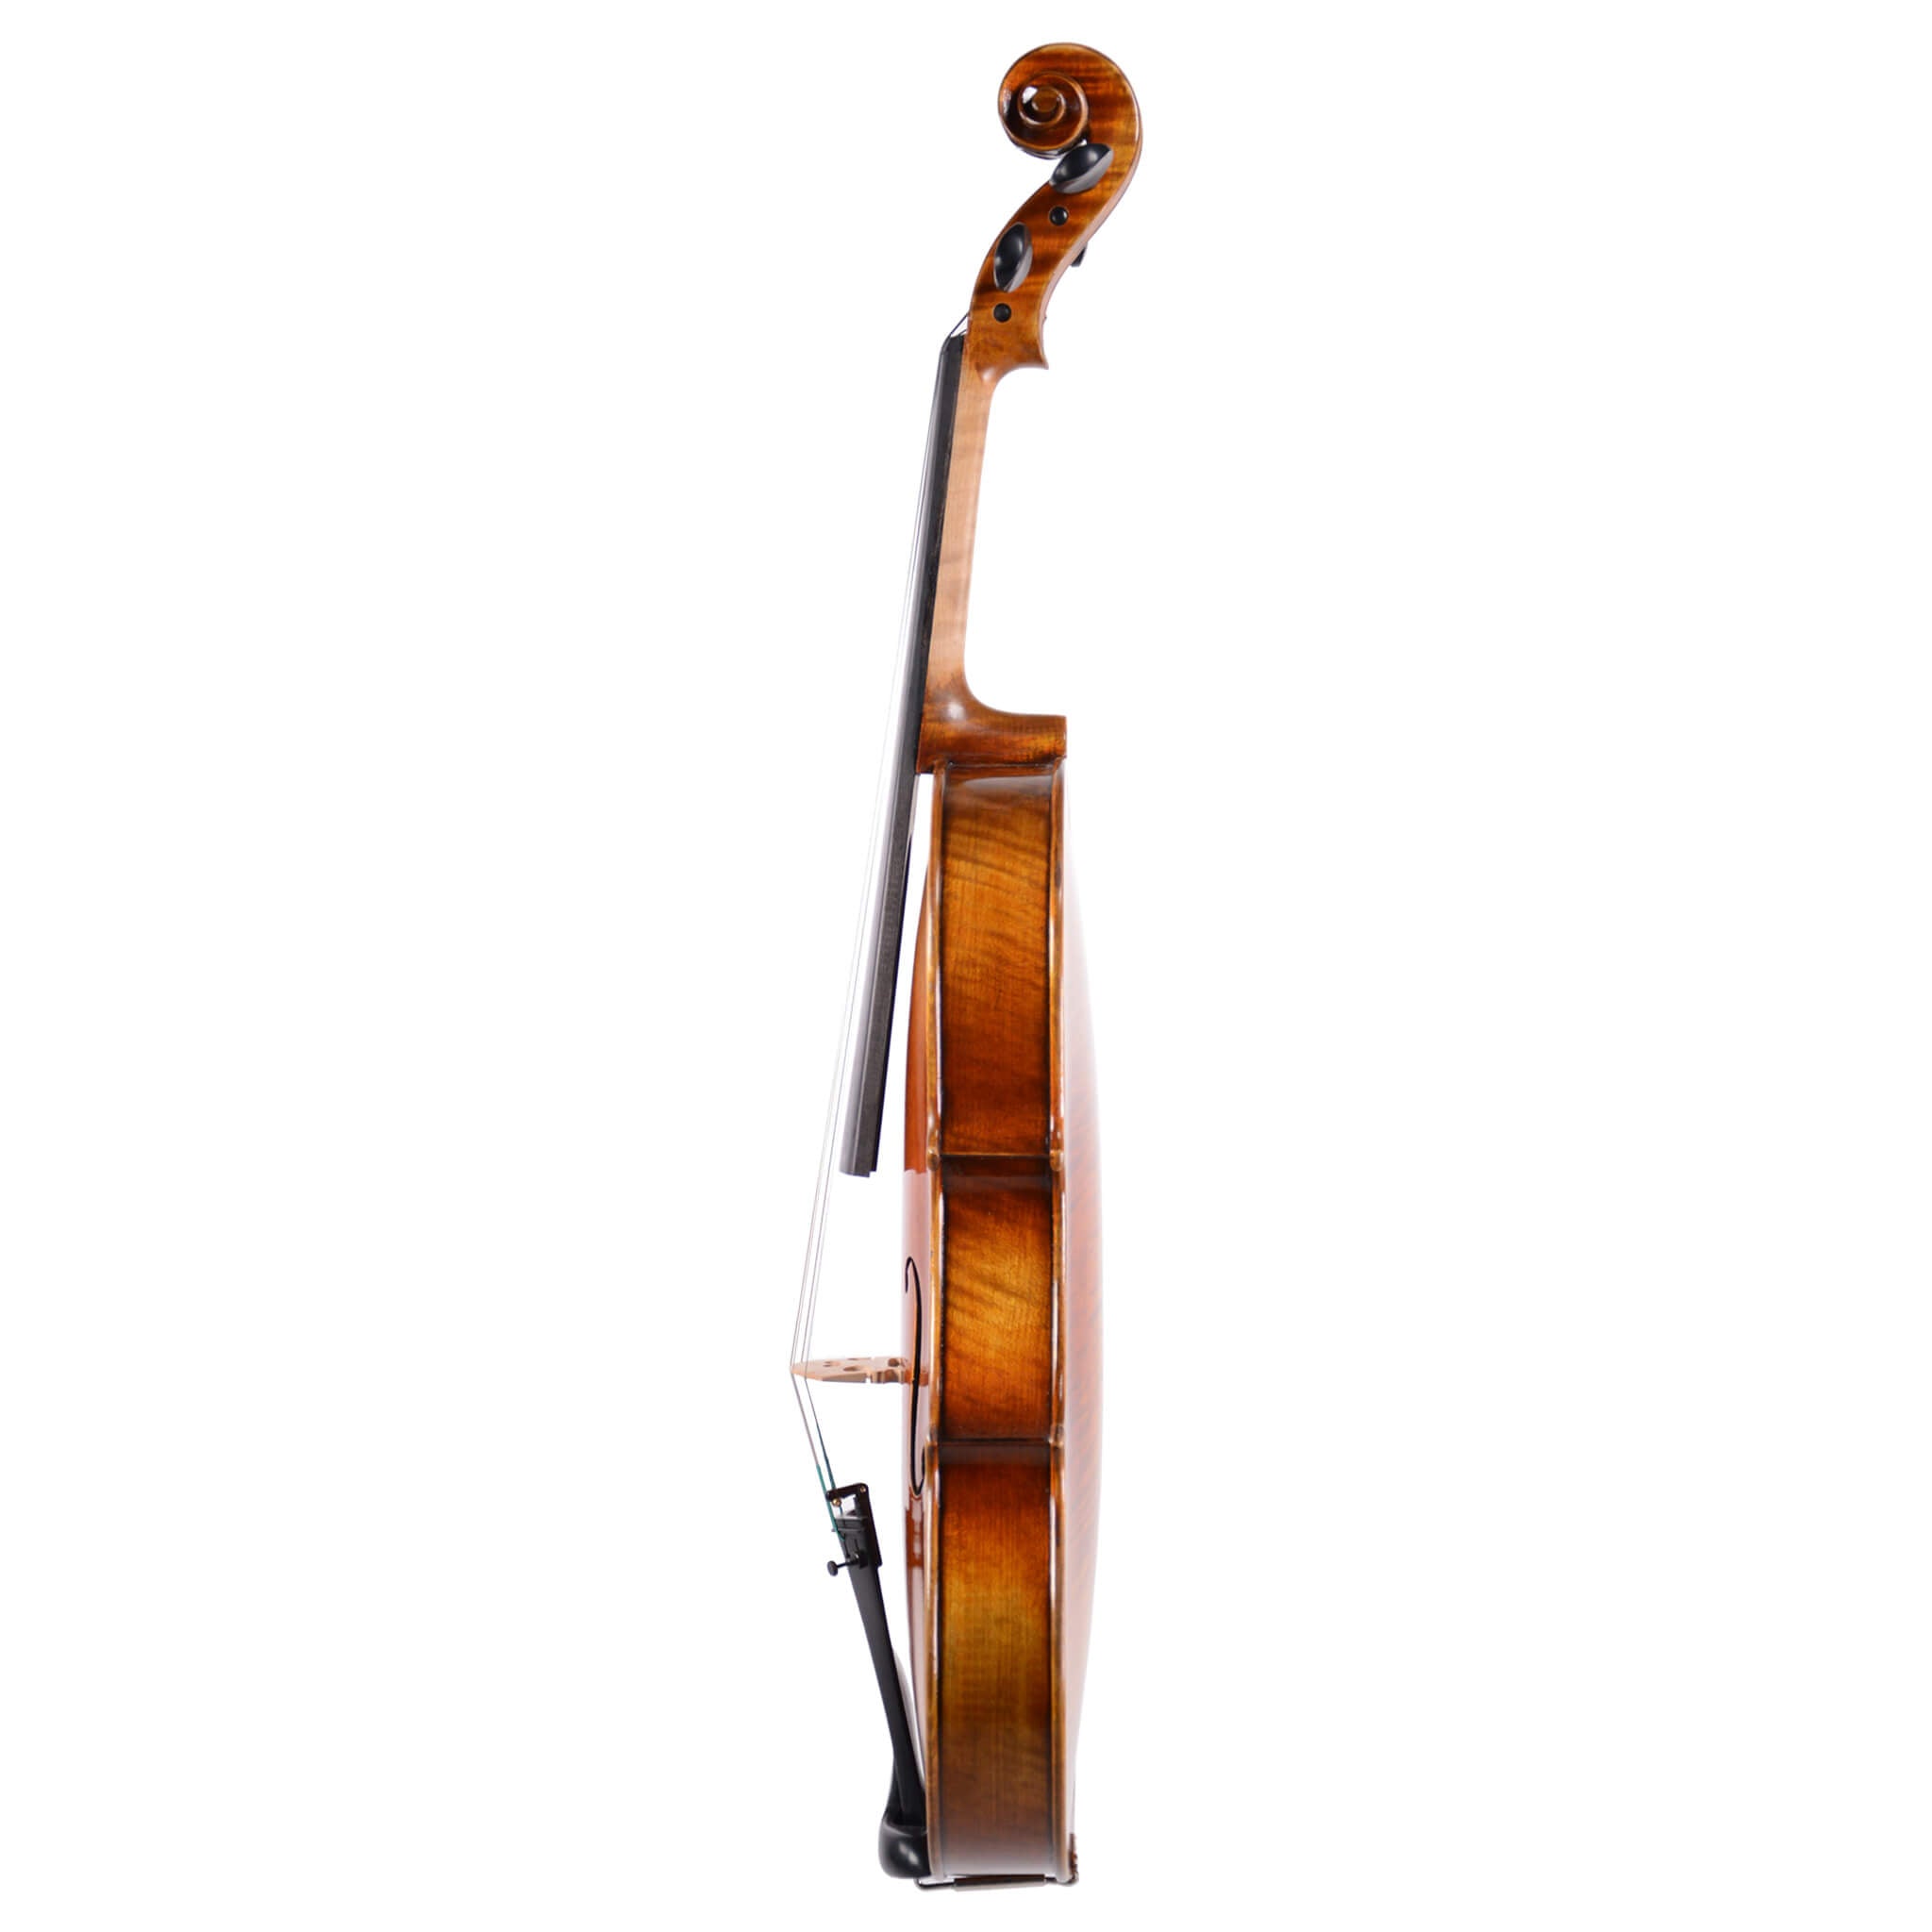 B-Stock Fiddlerman Master Viola Outfit